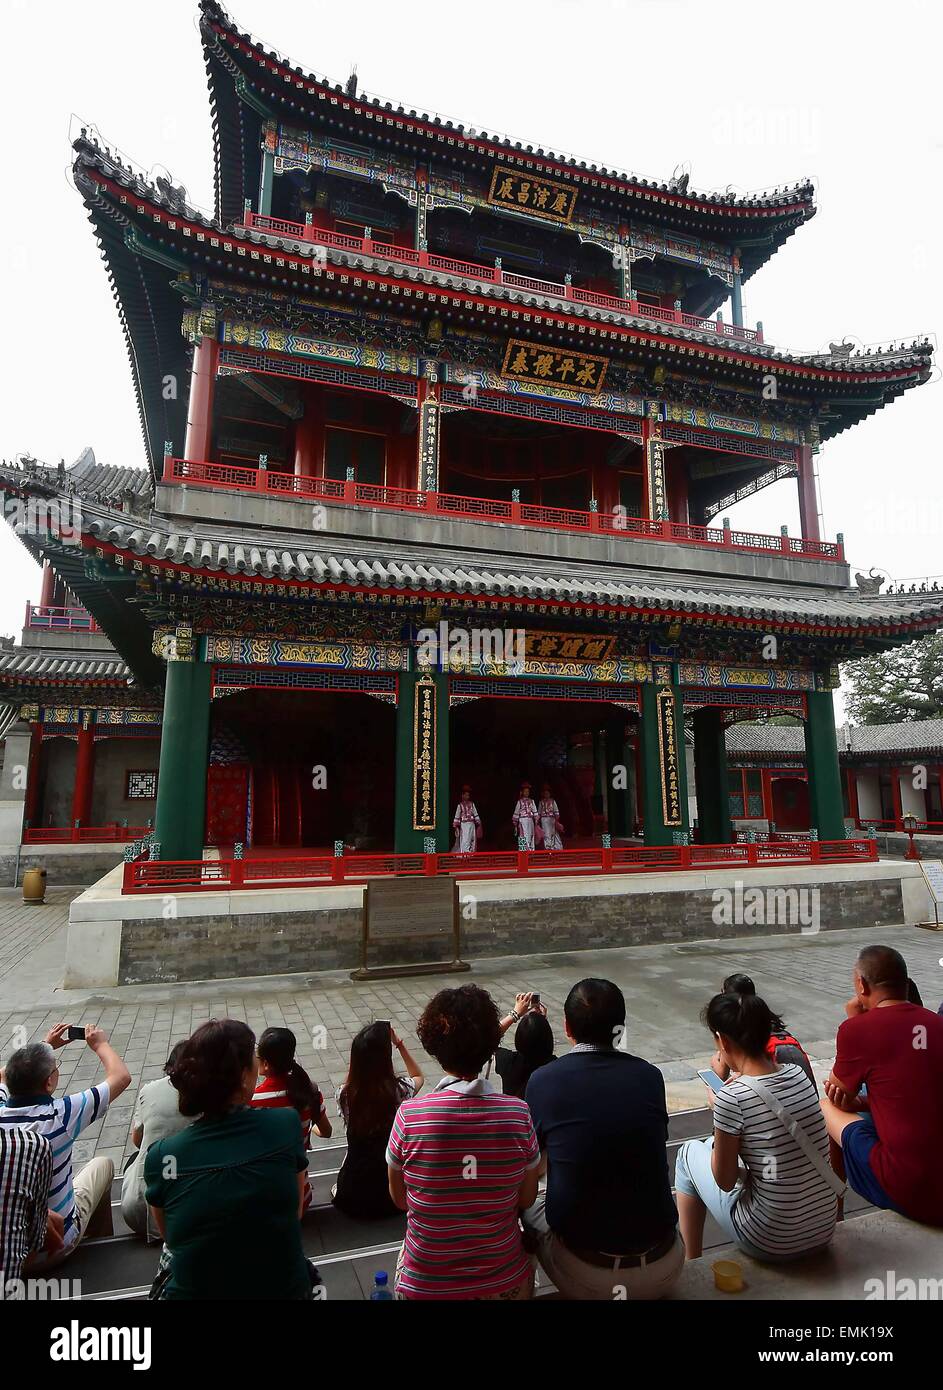 Beijing, China. 31st Aug, 2014. People watch a performance in front of the stage of Dehe Garden in the Summer Palace of Beijing, capital of China, Aug. 31, 2014. China's performing stage is an essential part of traditional Chinese architecture. Most well-preserved ancient stages were built in Ming Dynasty (1368-1644) and Qing Dynasty (1644-1911). It generally consists of indoor and outdoor types. The main construction materials are wood, brick and stone. Its unique acoustics property has become an important object for experts. © Wang Song/Xinhua/Alamy Live News Stock Photo